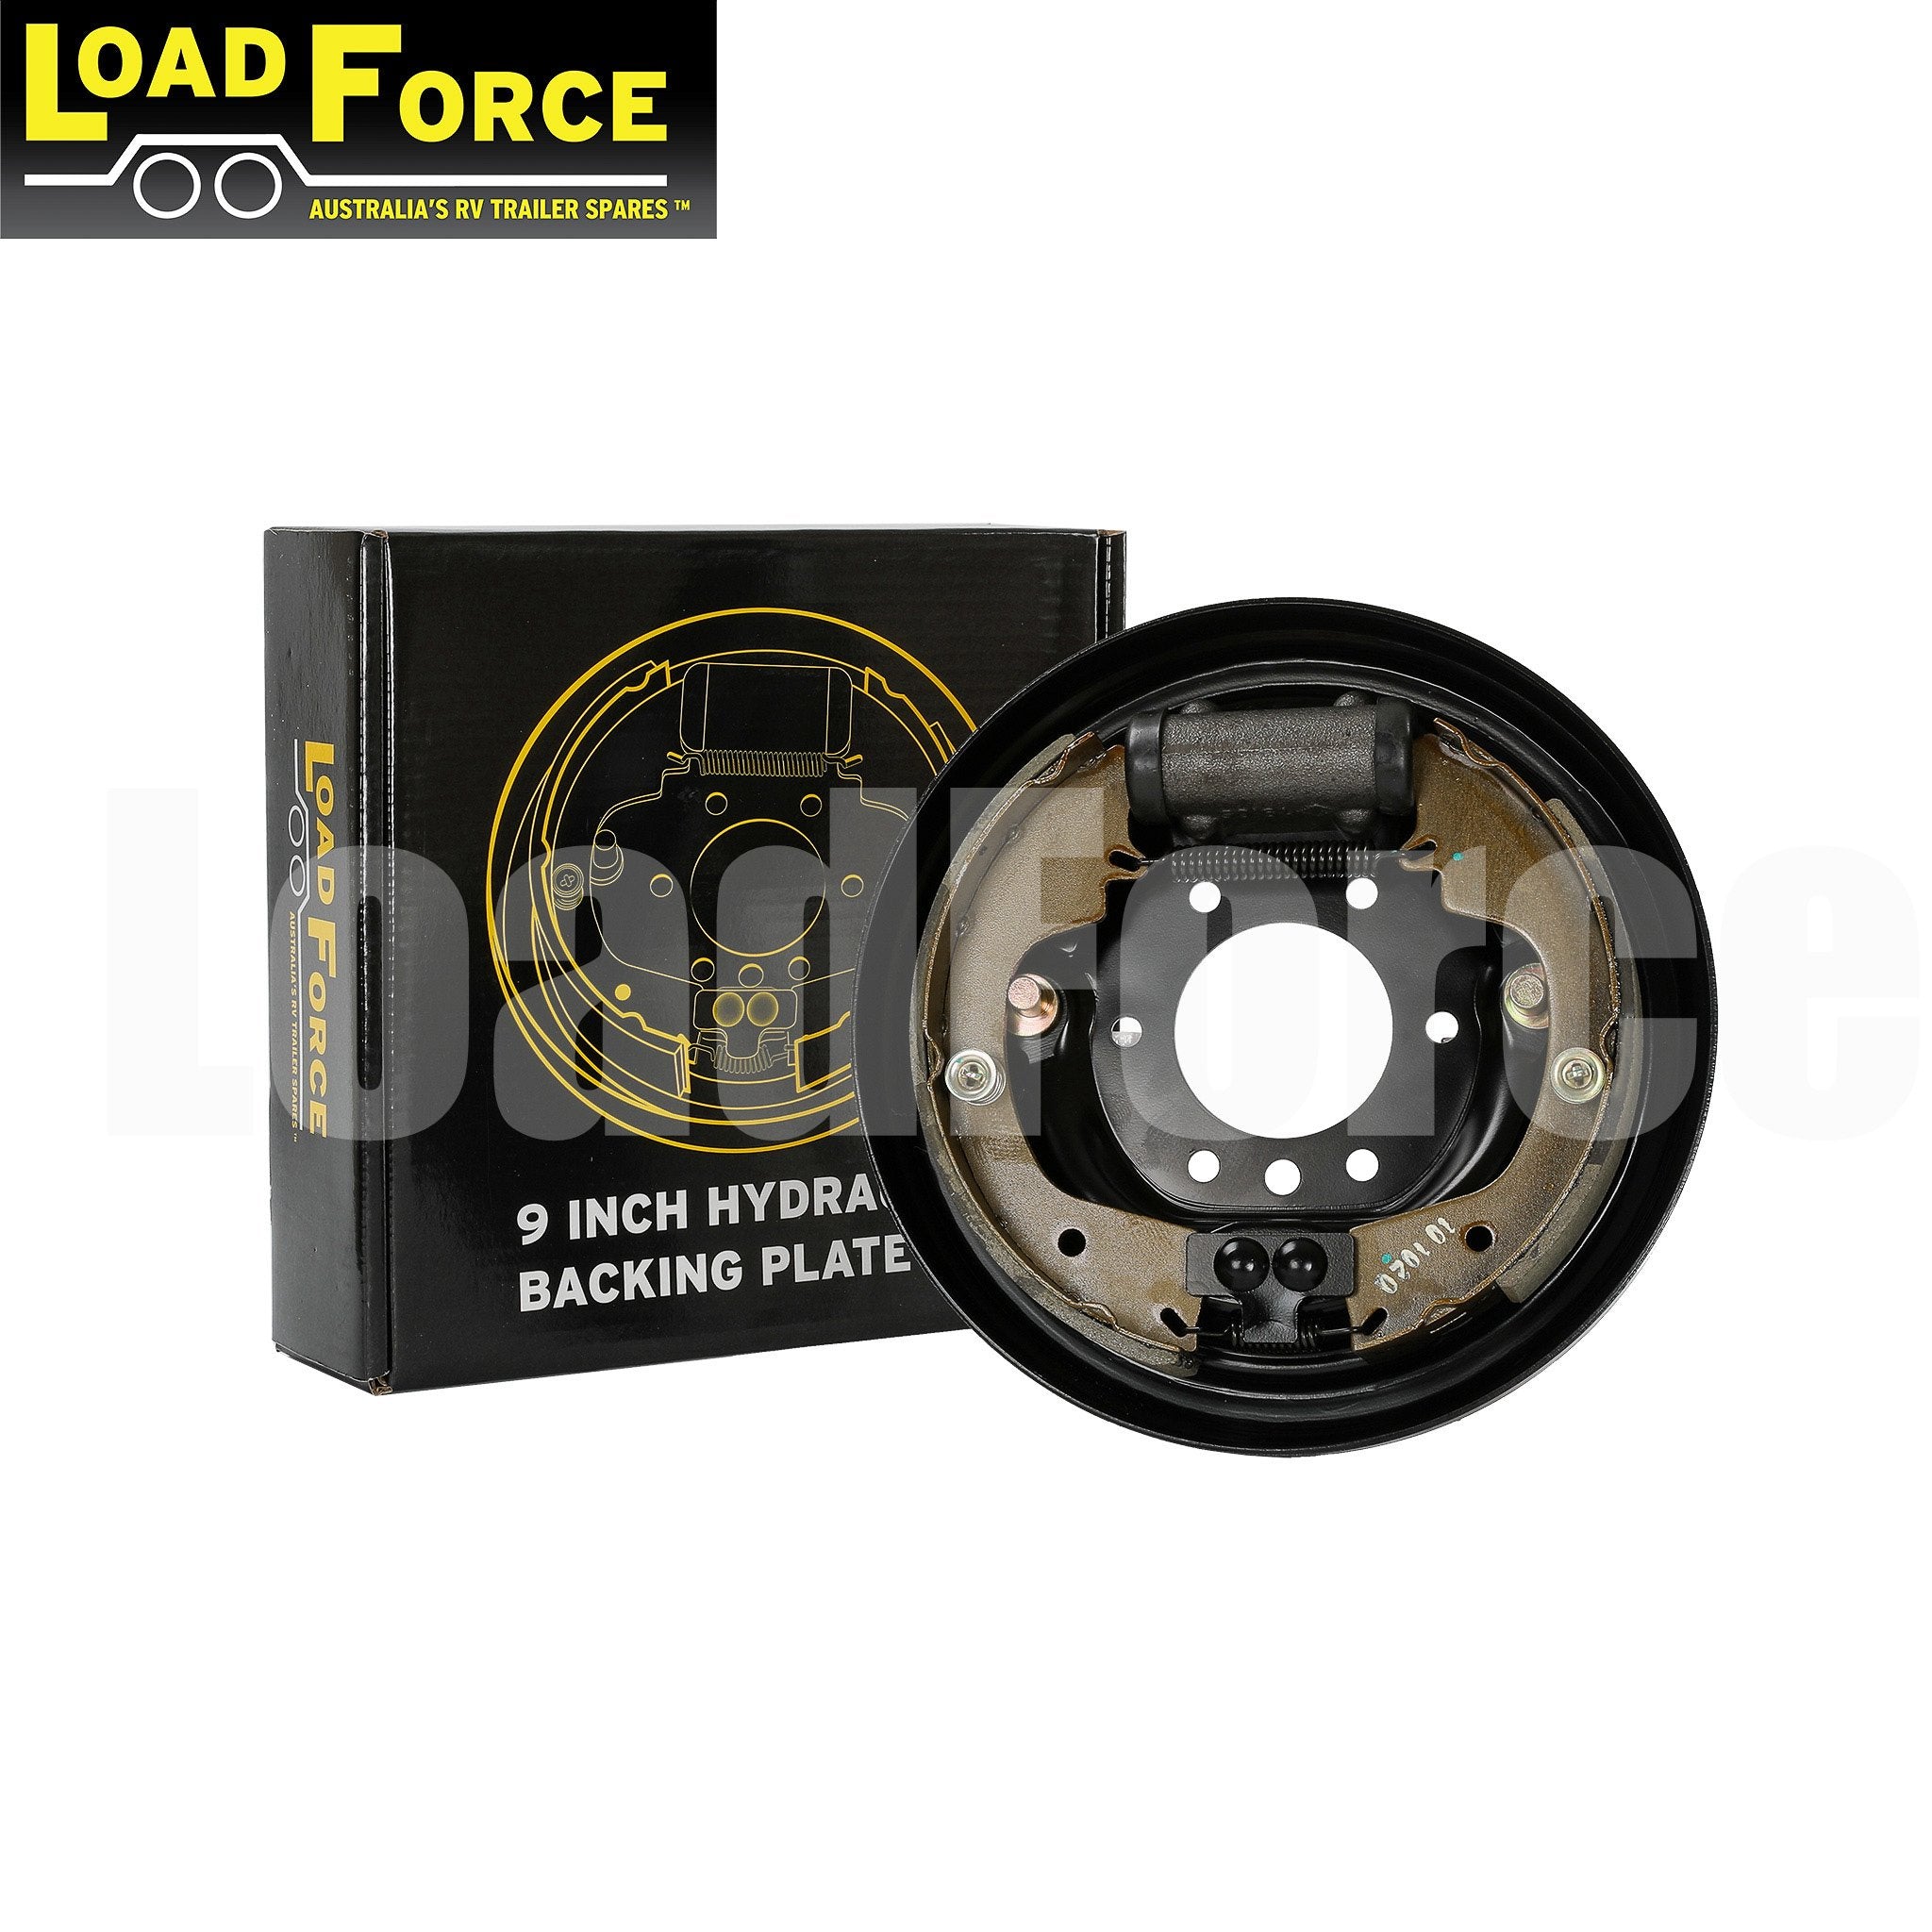 LoadForce 9 inch trailer hydraulic backing plate assembly left hand